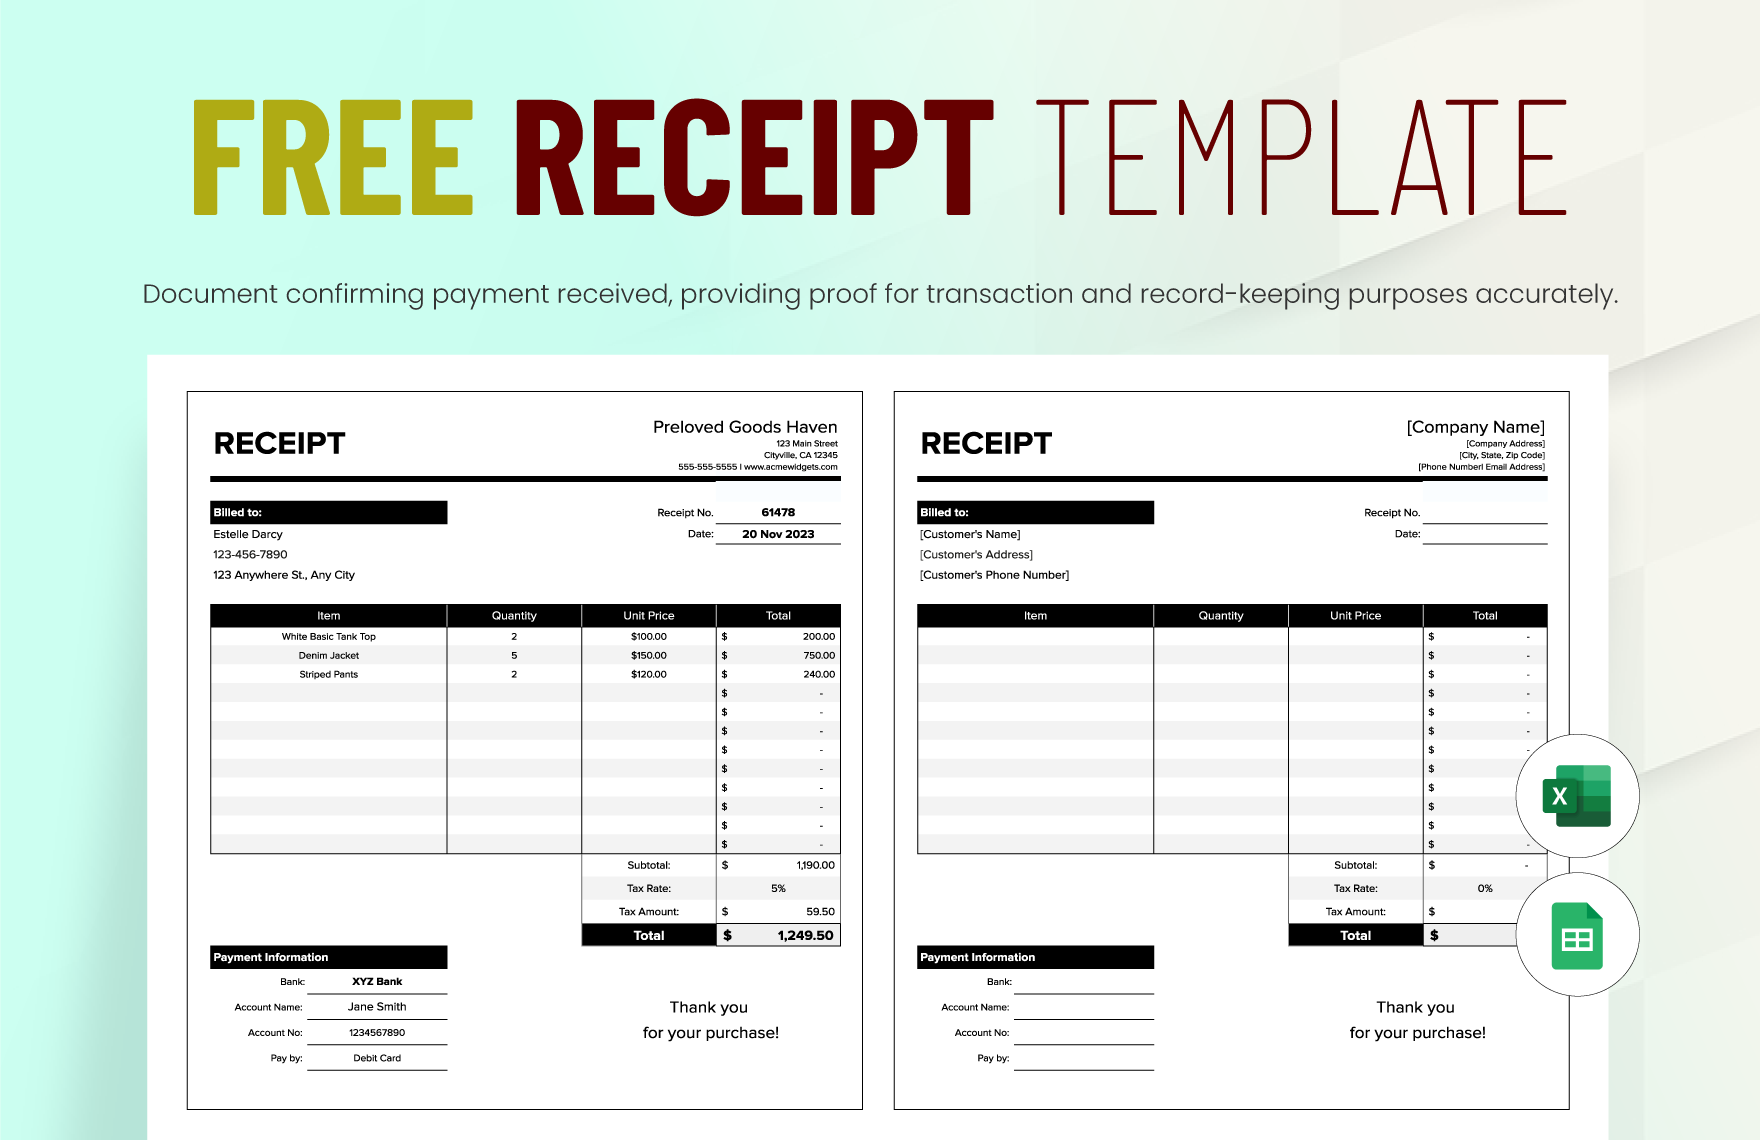 Free Receipt Template in Excel, Google Sheets